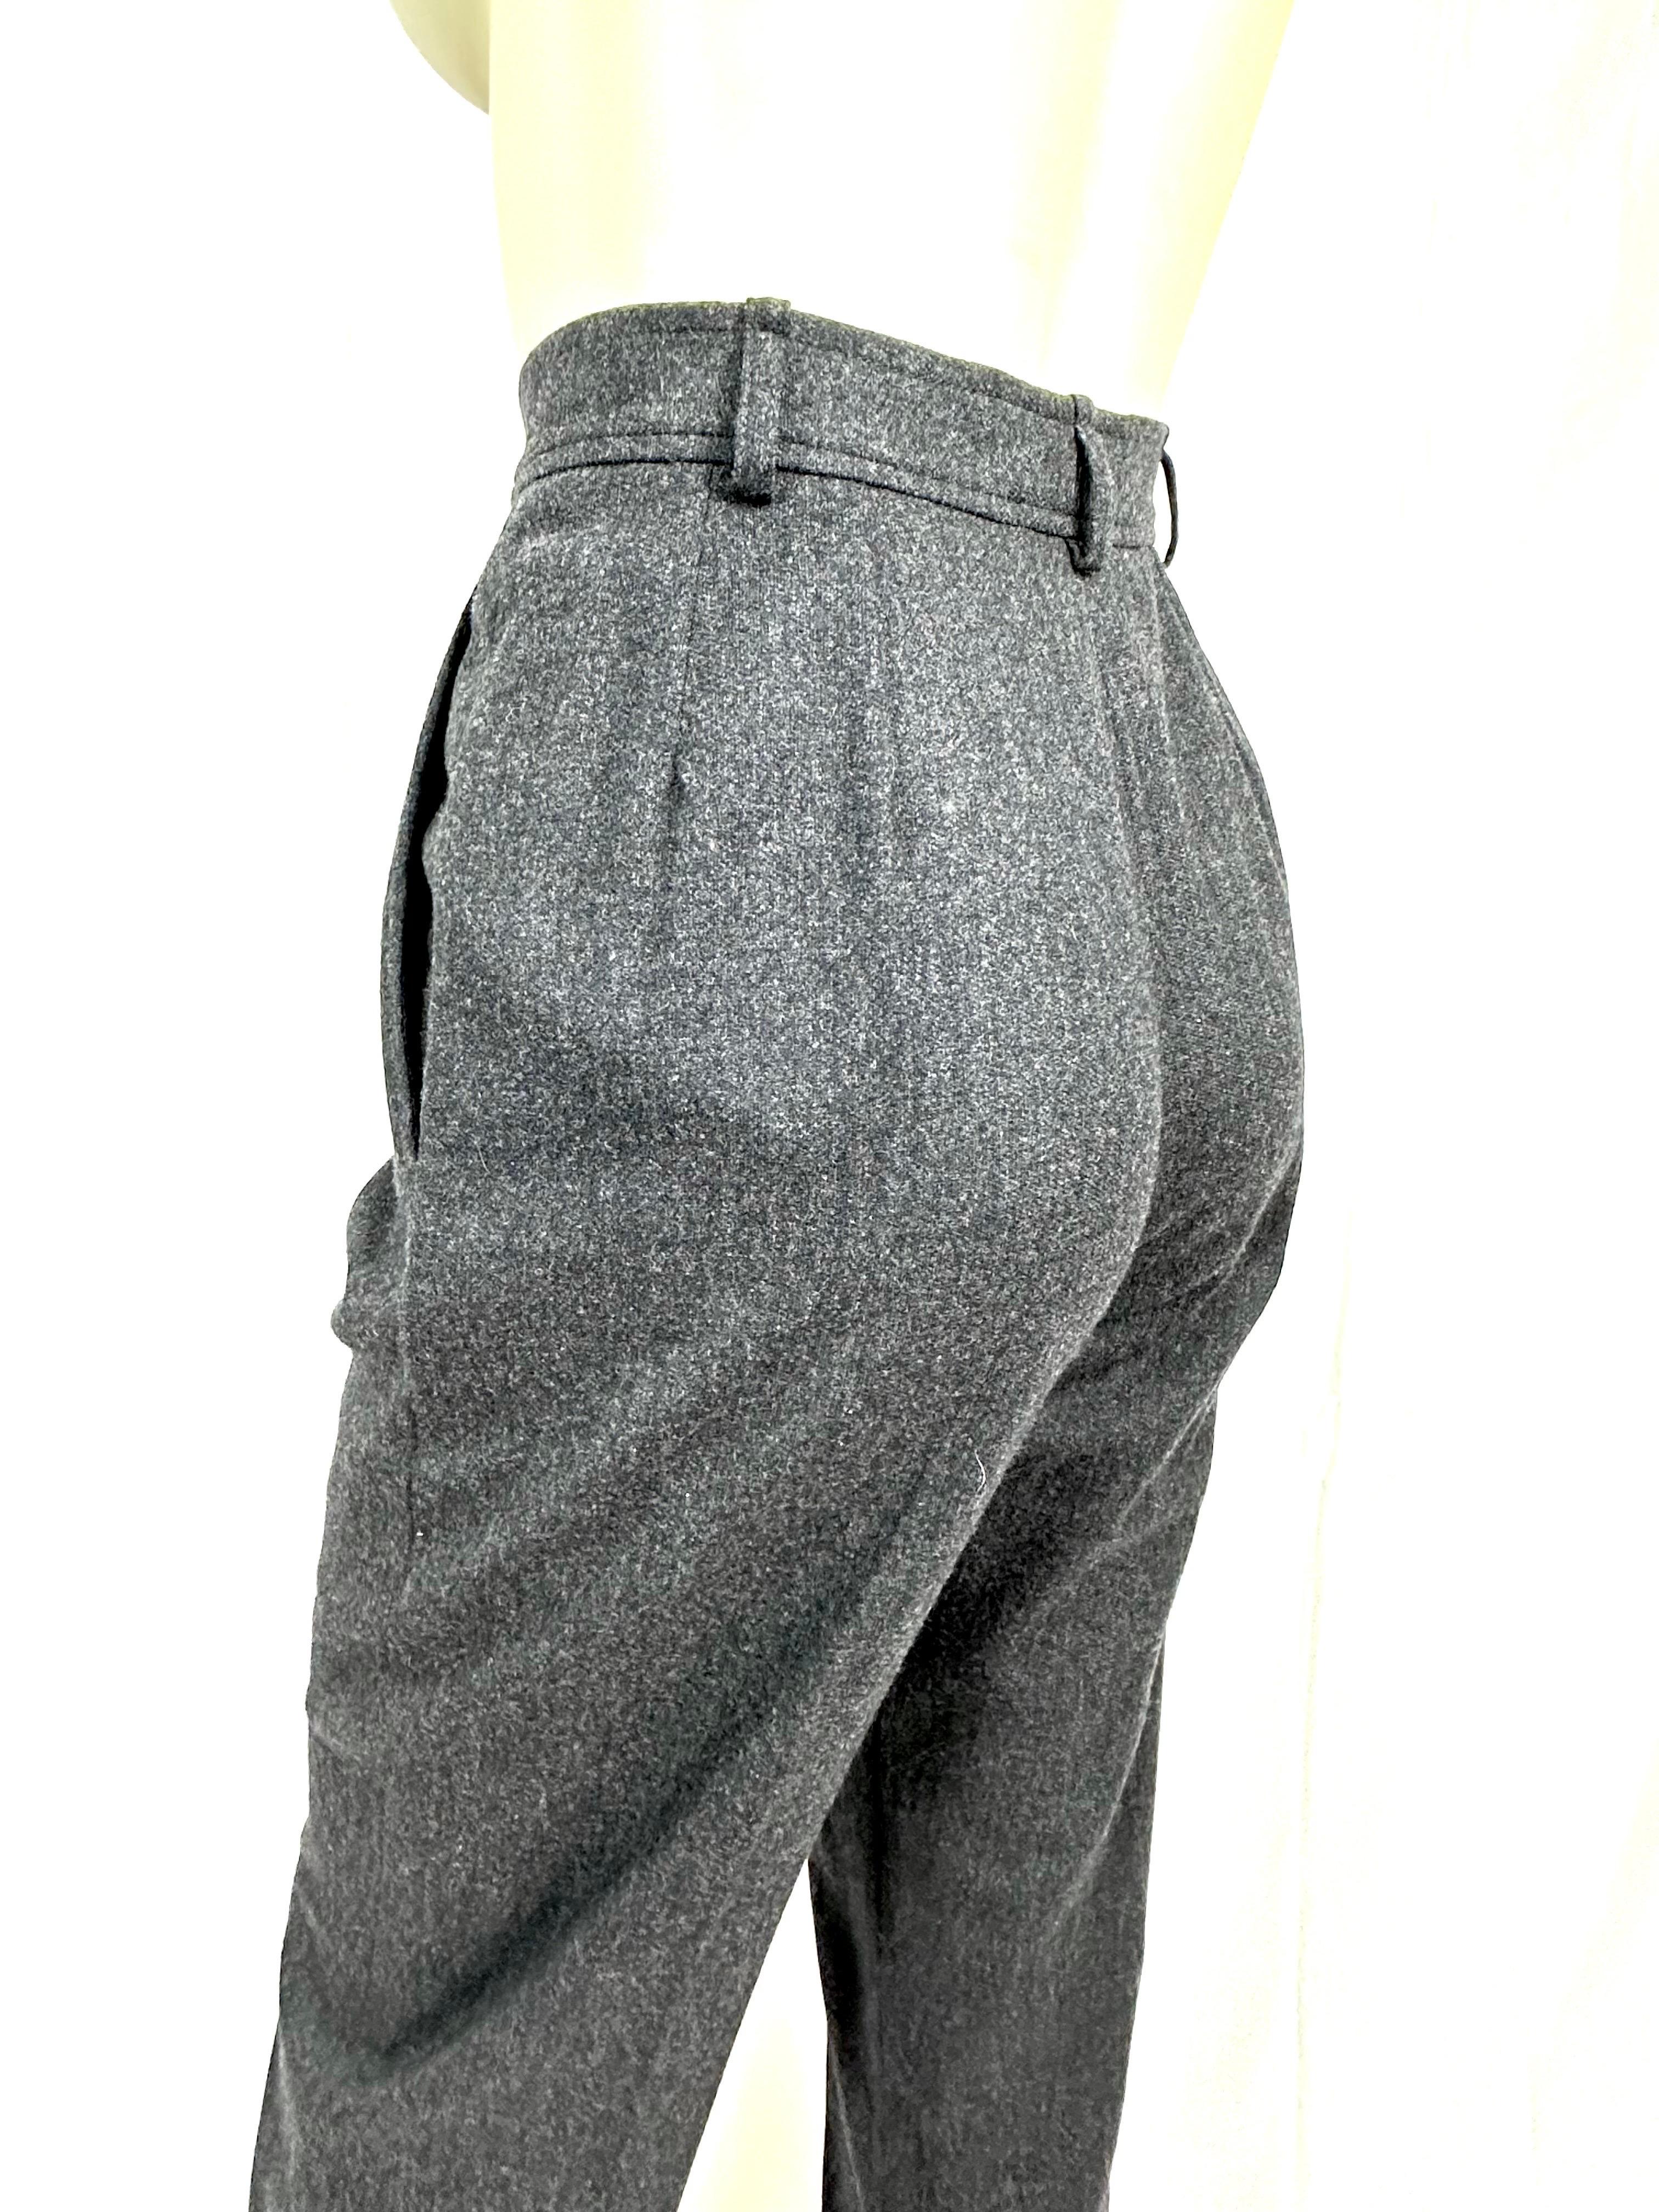 Ysl vintage anthracite gray wool trousers from the 1990s 3